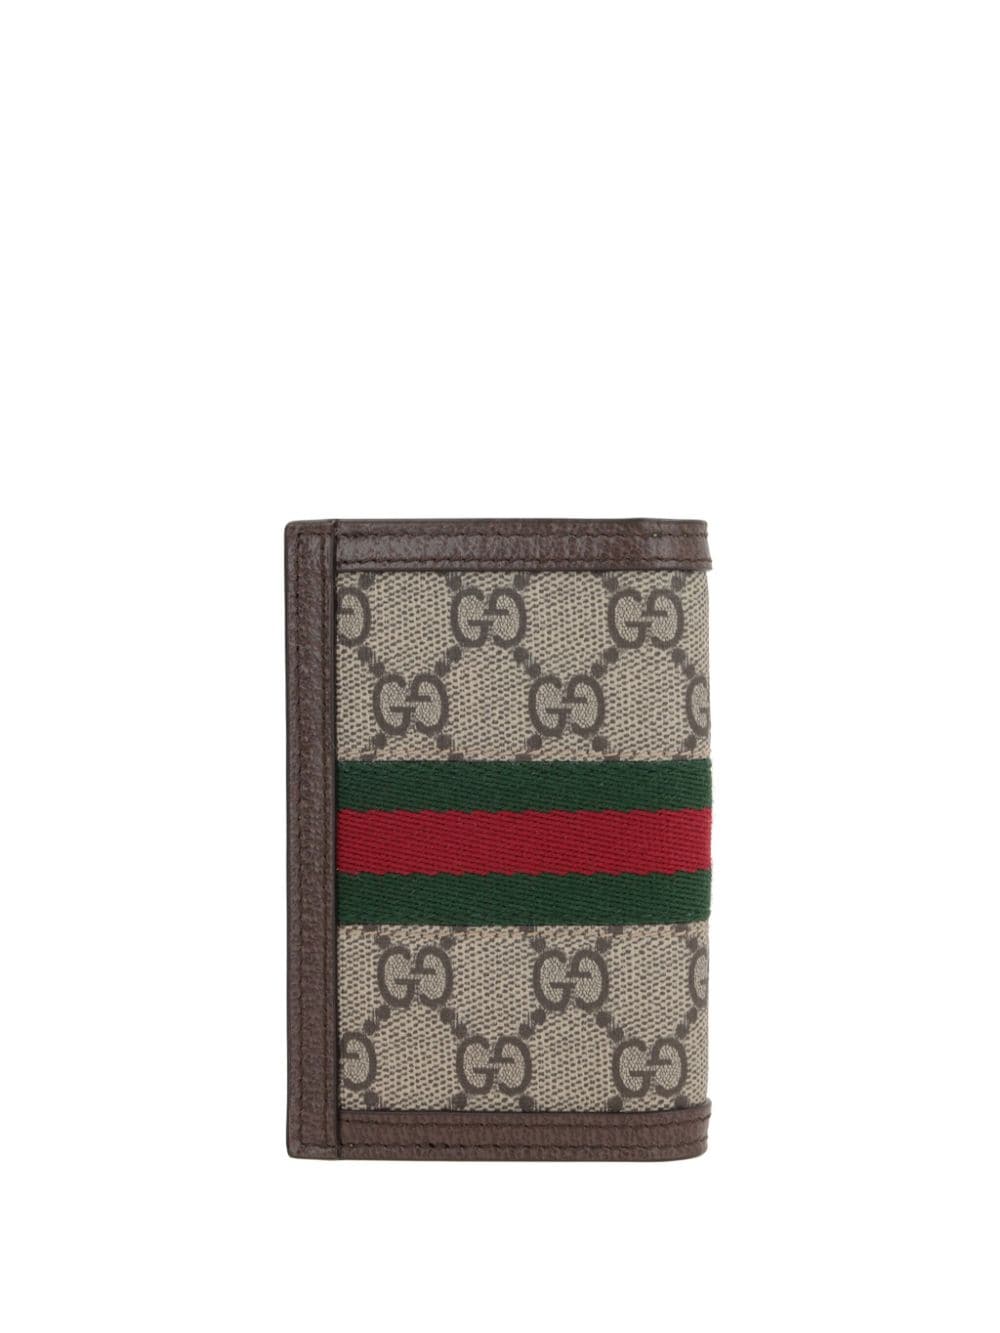 Gucci Ophidia GG-plaque wallet - Bruin